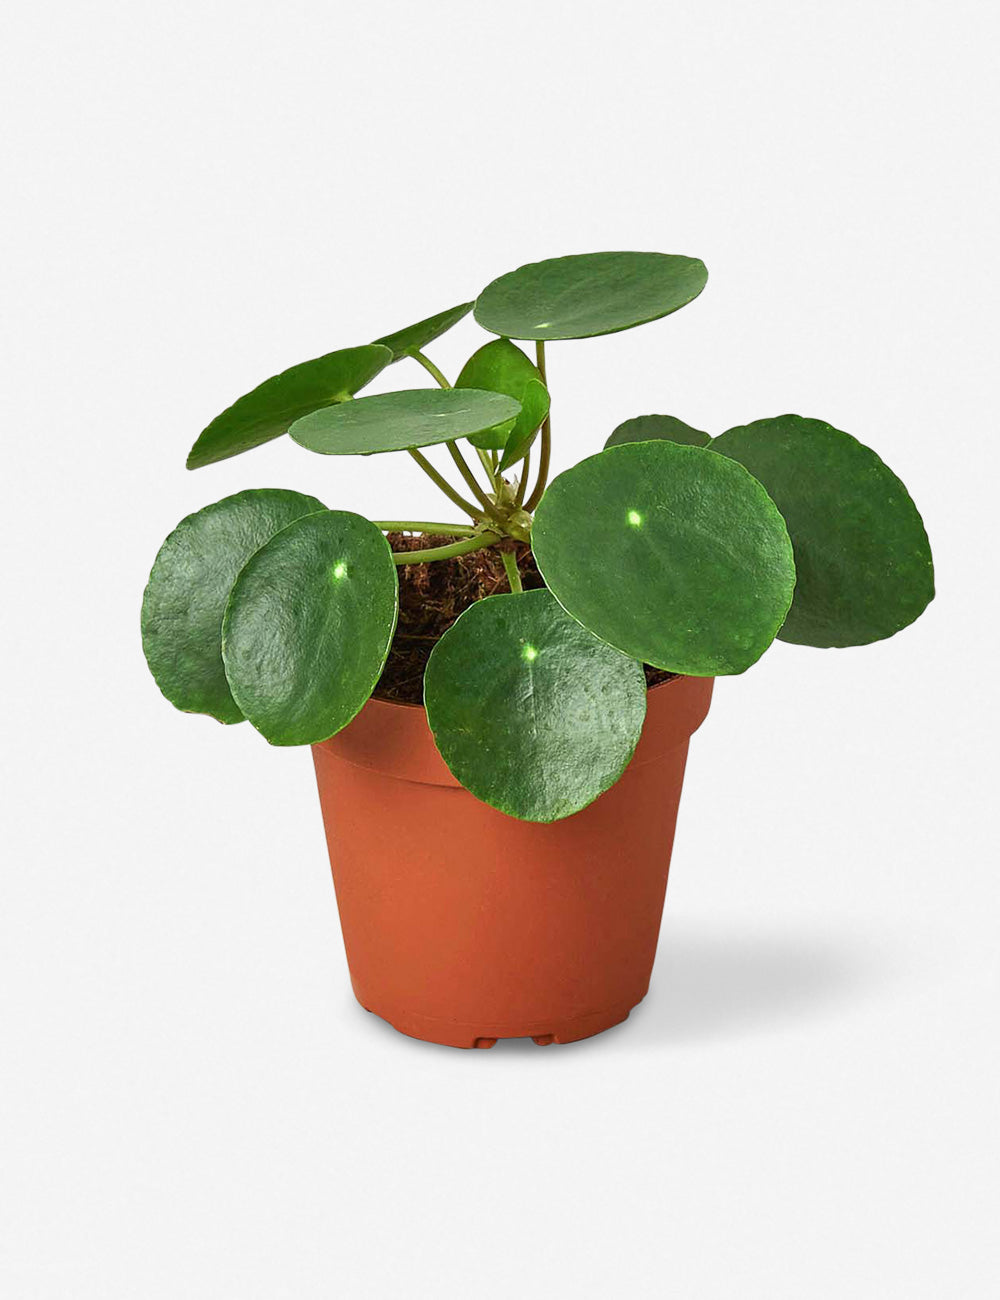 live pilea peperomioides plant (chinese money plant)